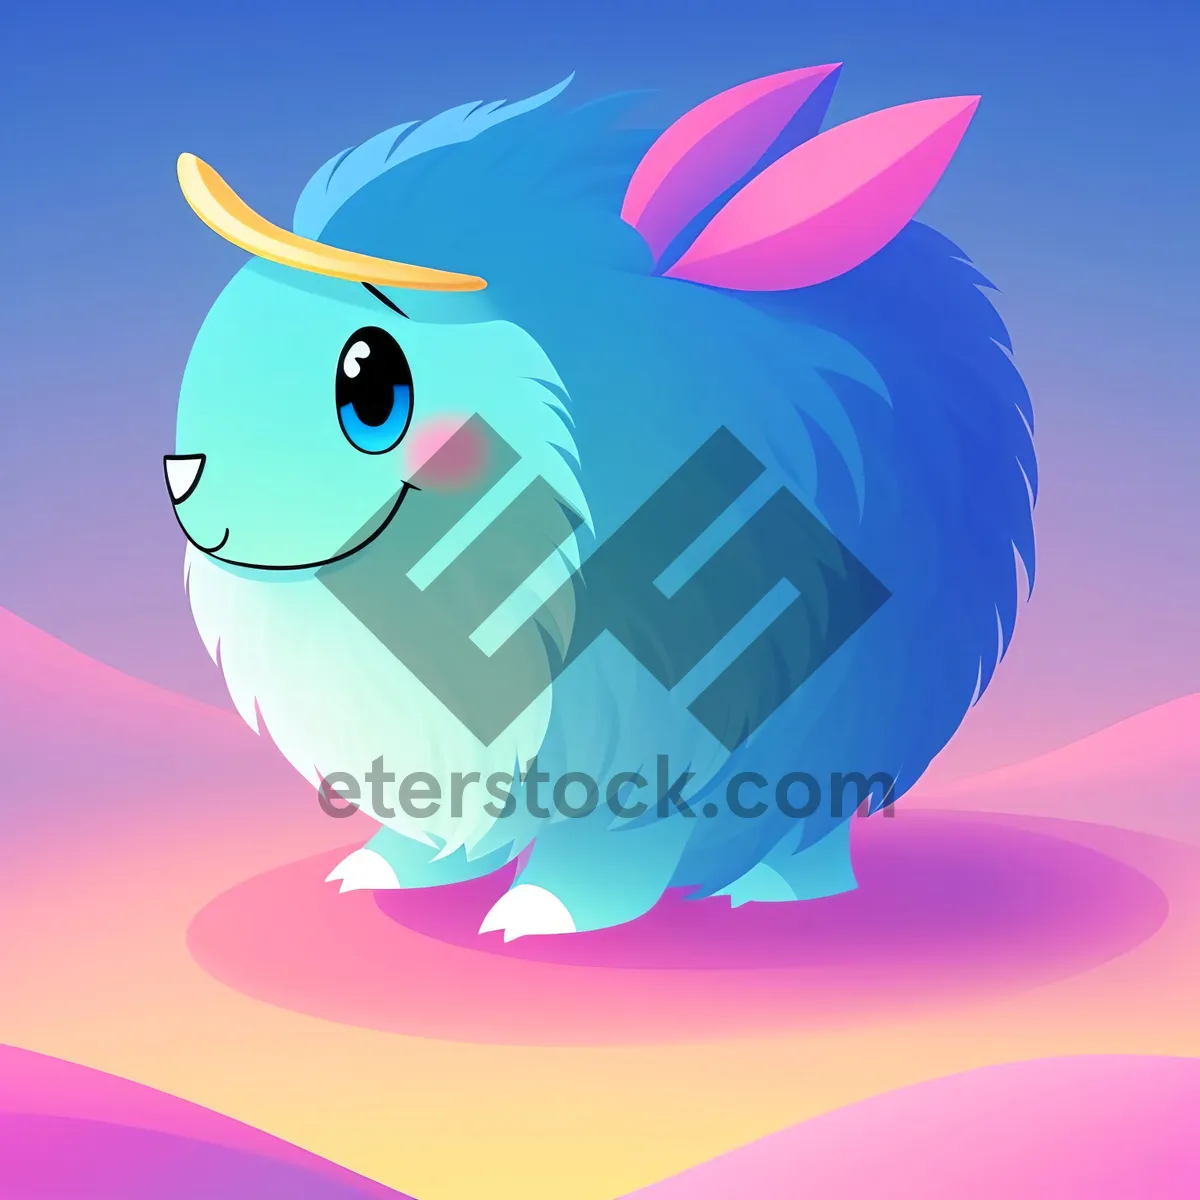 Picture of Cute Cartoon Piglet with Bunny Illustration